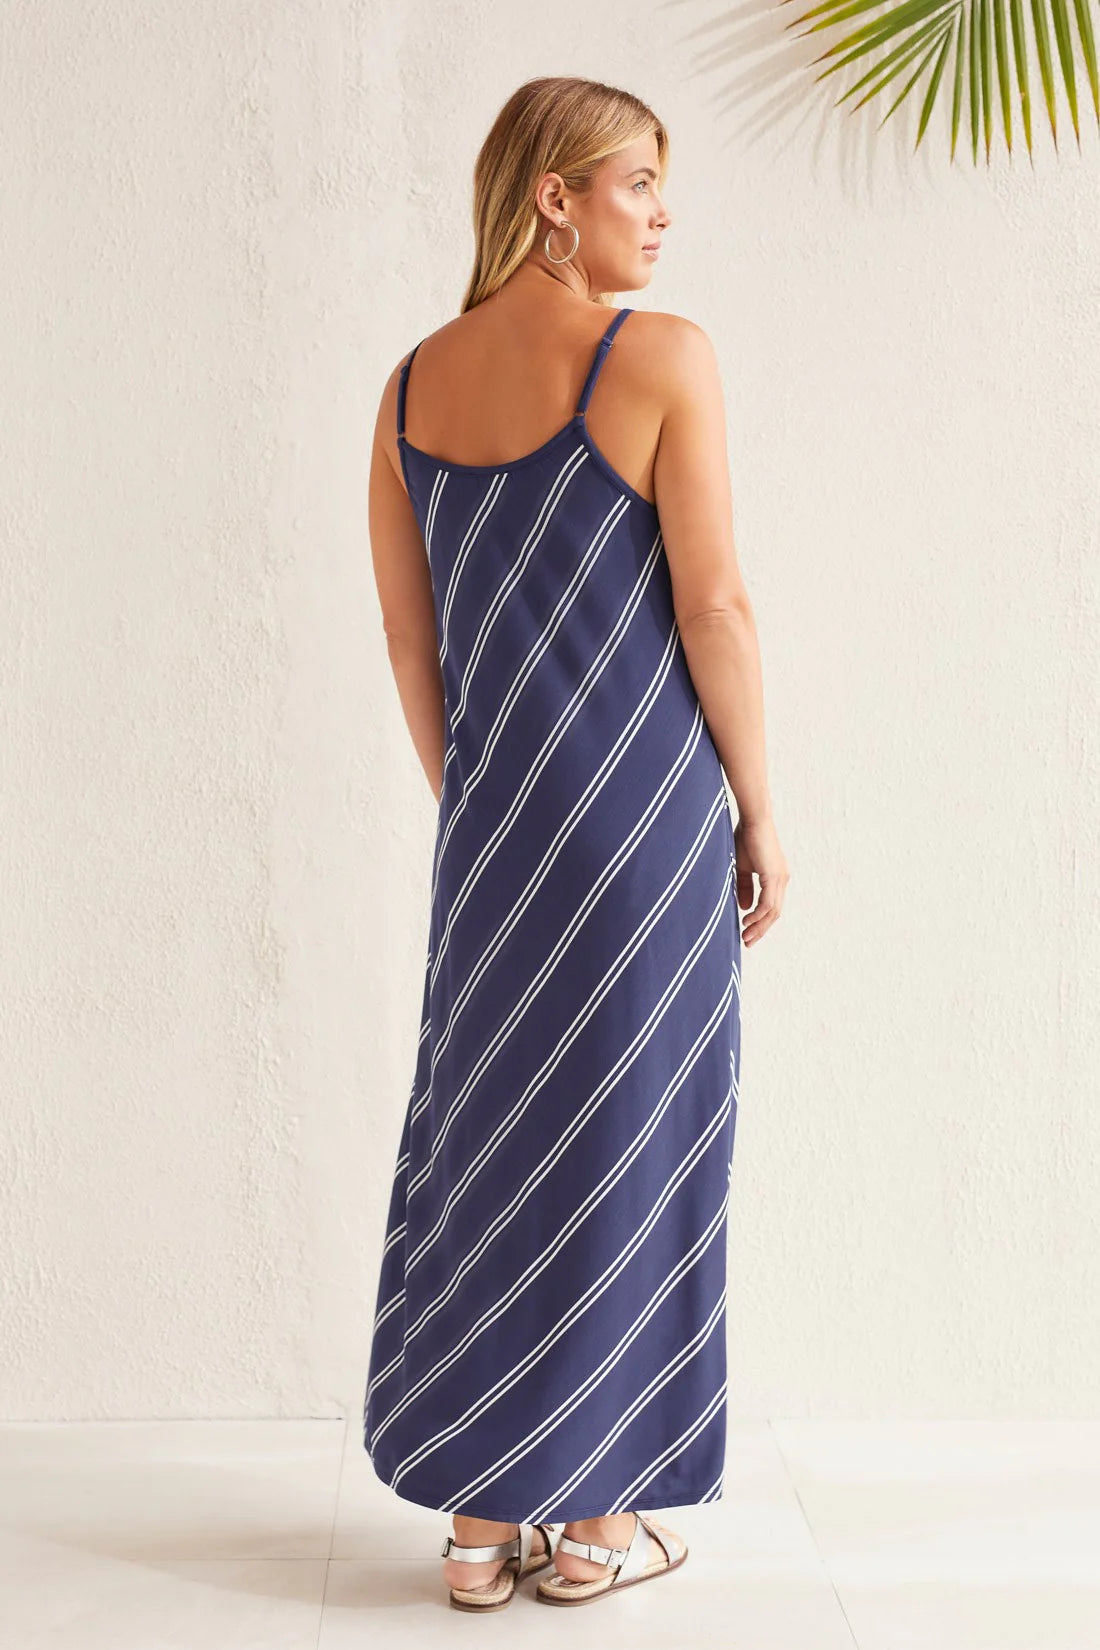 A sleeveless design and stretch-infused fabric make this flowy maxi dress a must-have addition to your warm-weather wardrobe. 